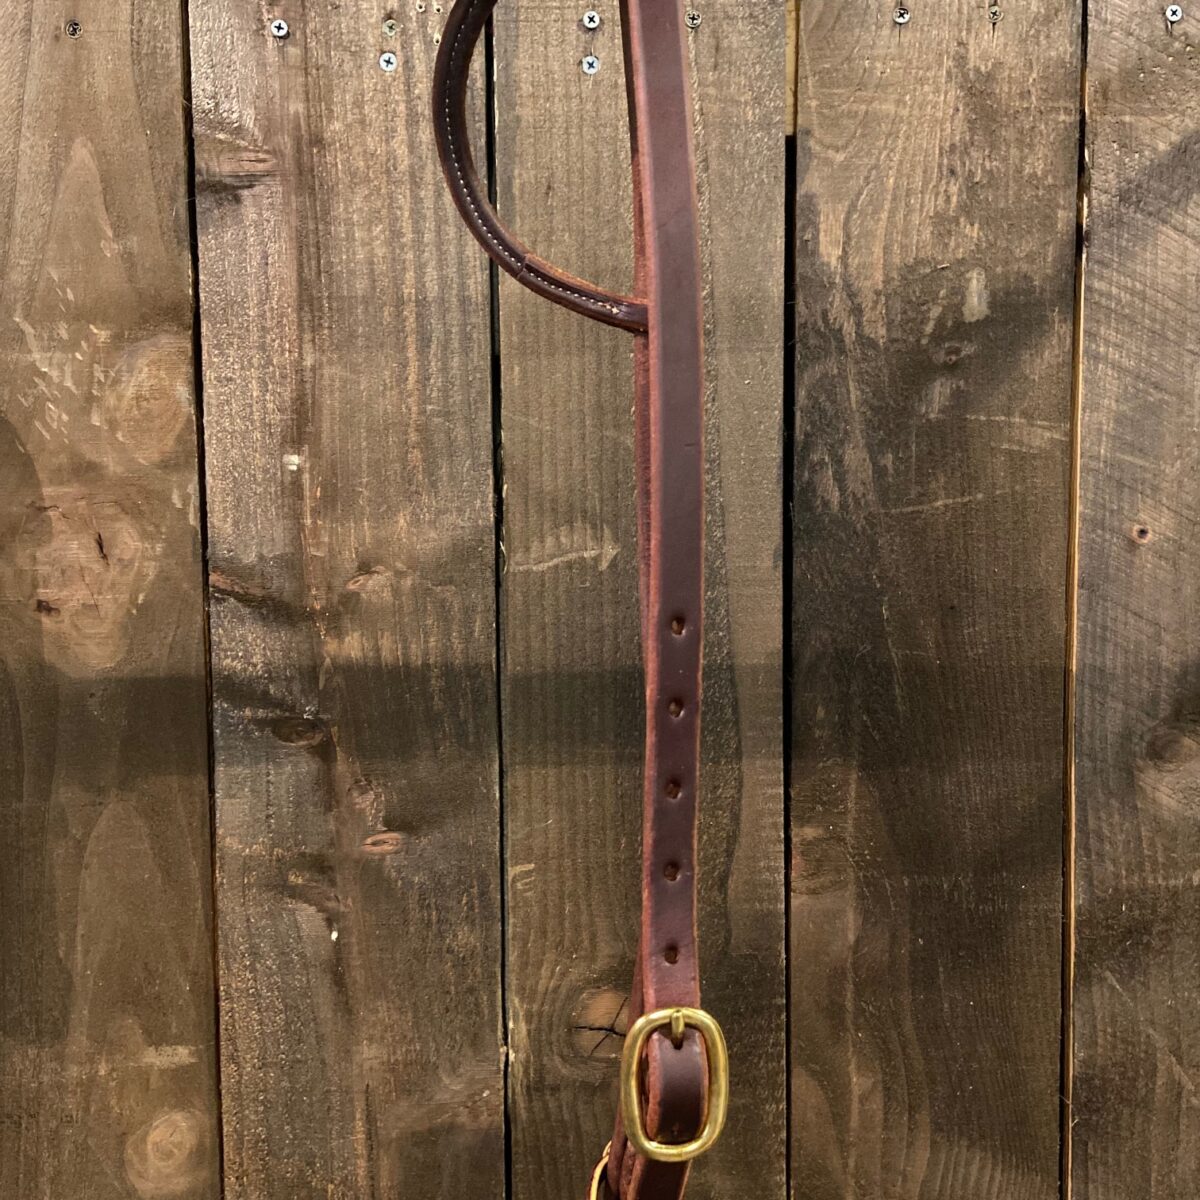 Saddle House Rolled Leather Romel Reins With Rawhide Buttons The